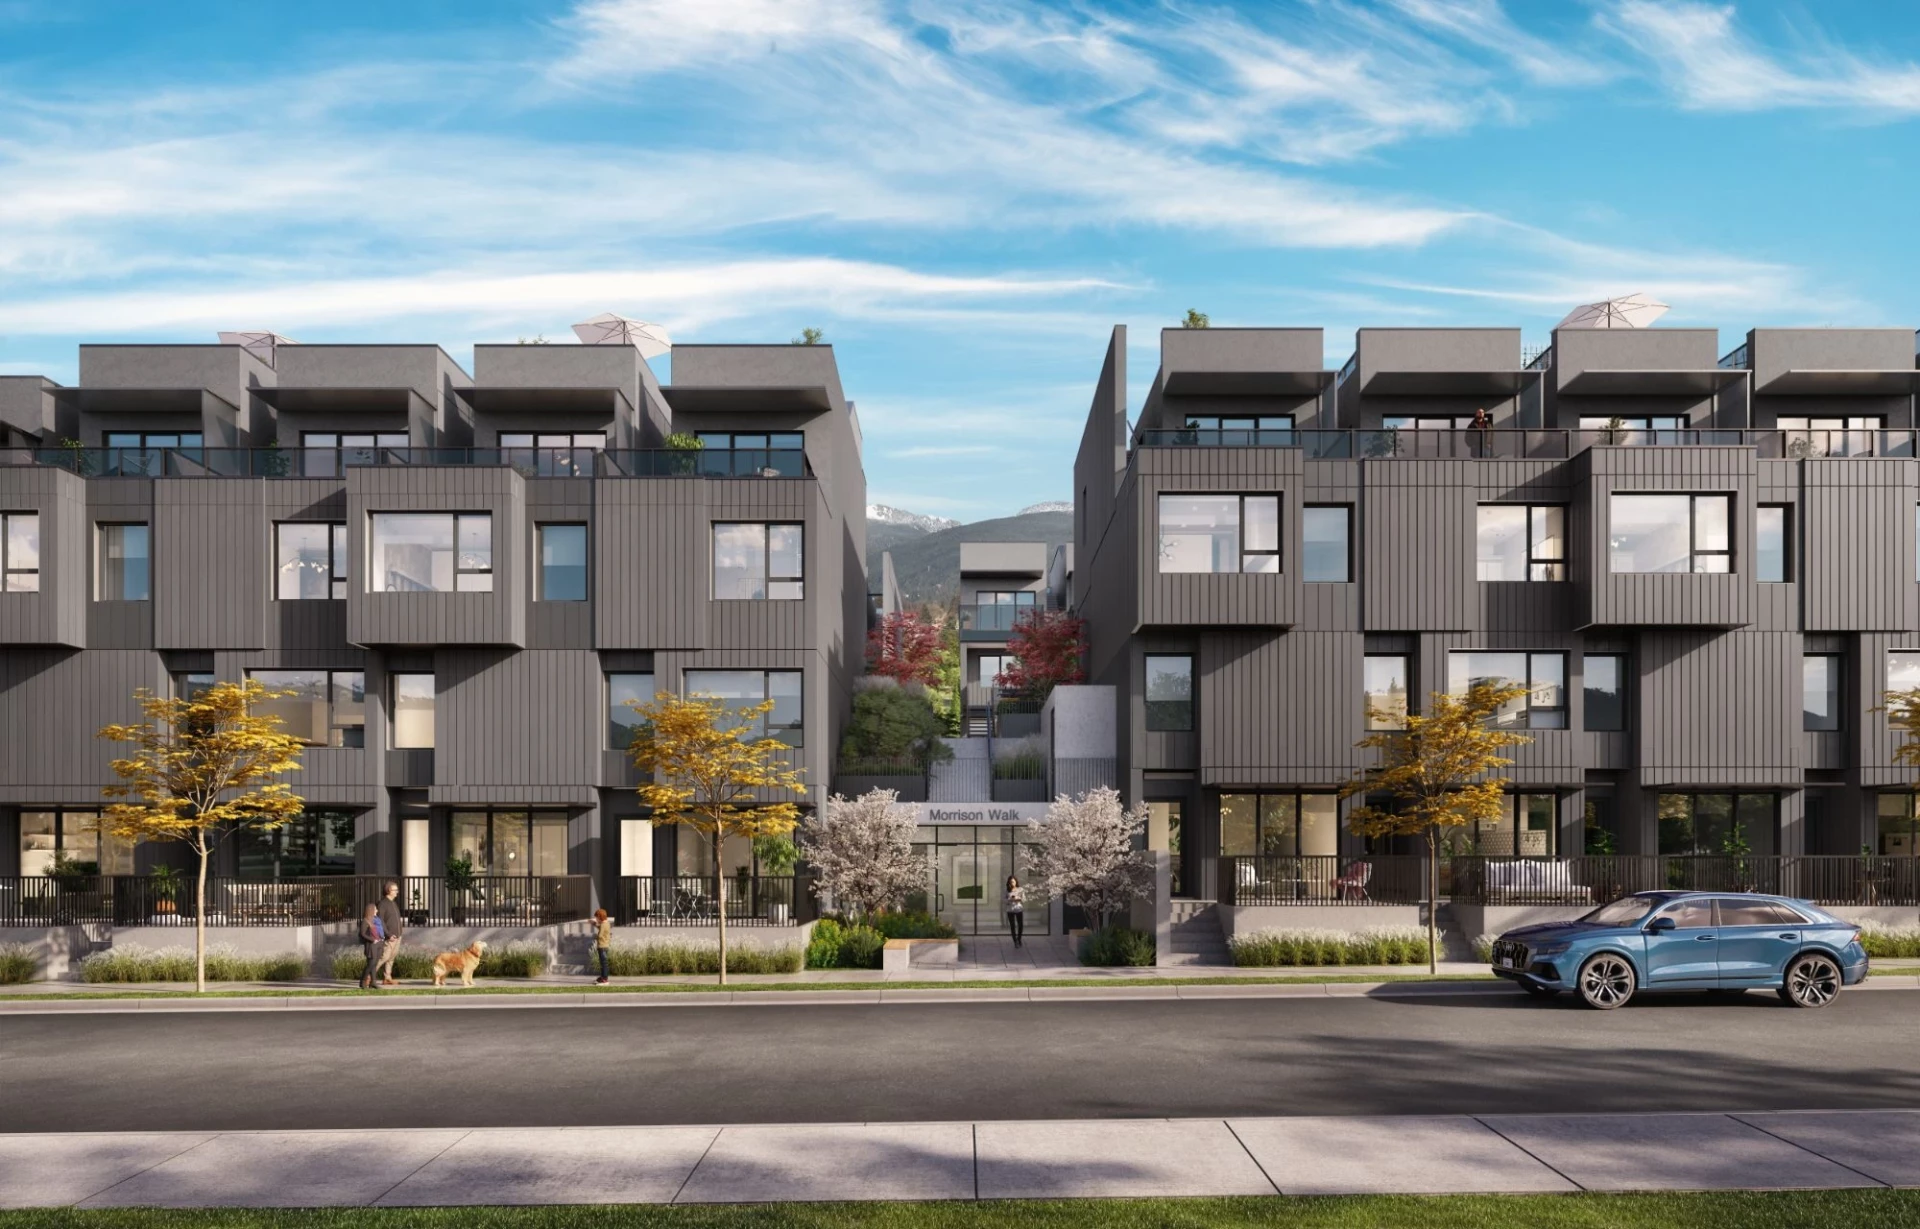 Morrison Walk by CREO Developments is a collection of 70 North Shore townhomes.